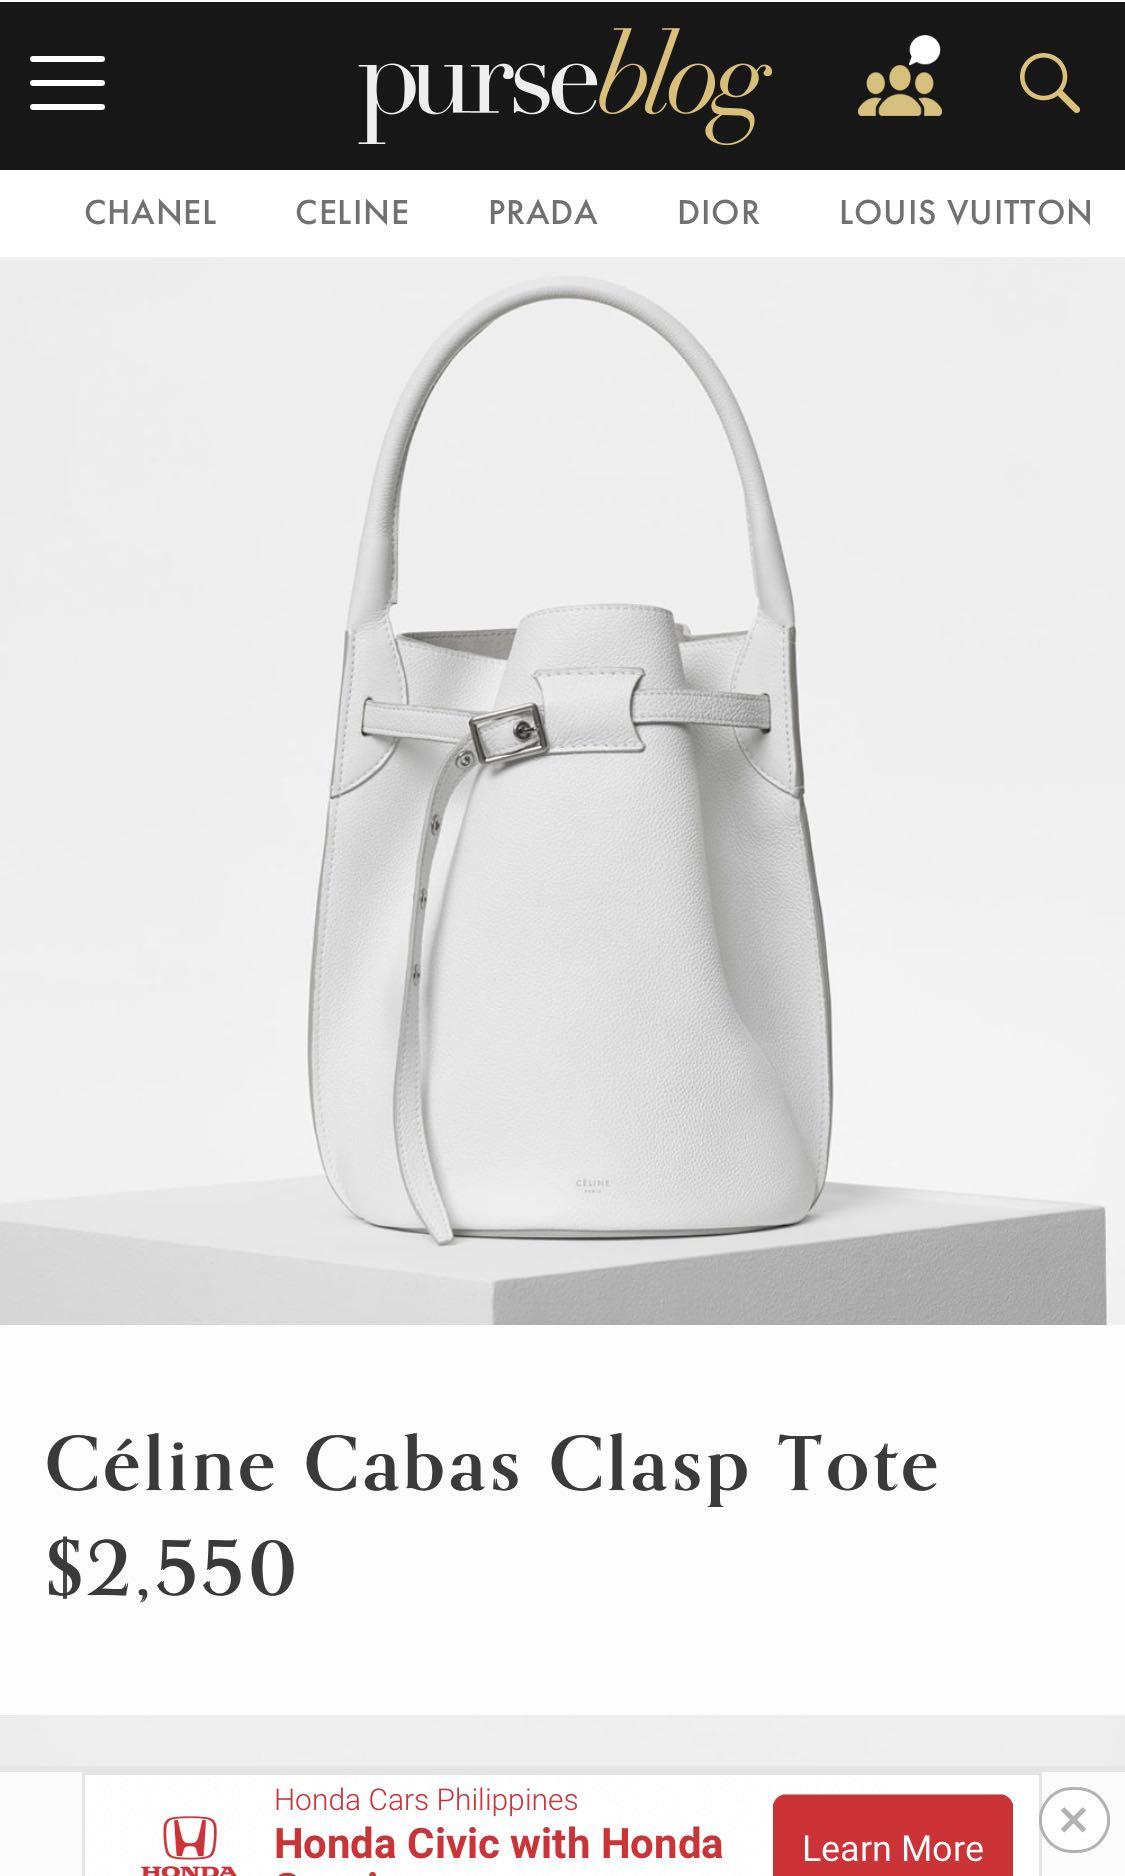 What Do You Think of the New Celine 16 Bucket? - PurseBlog